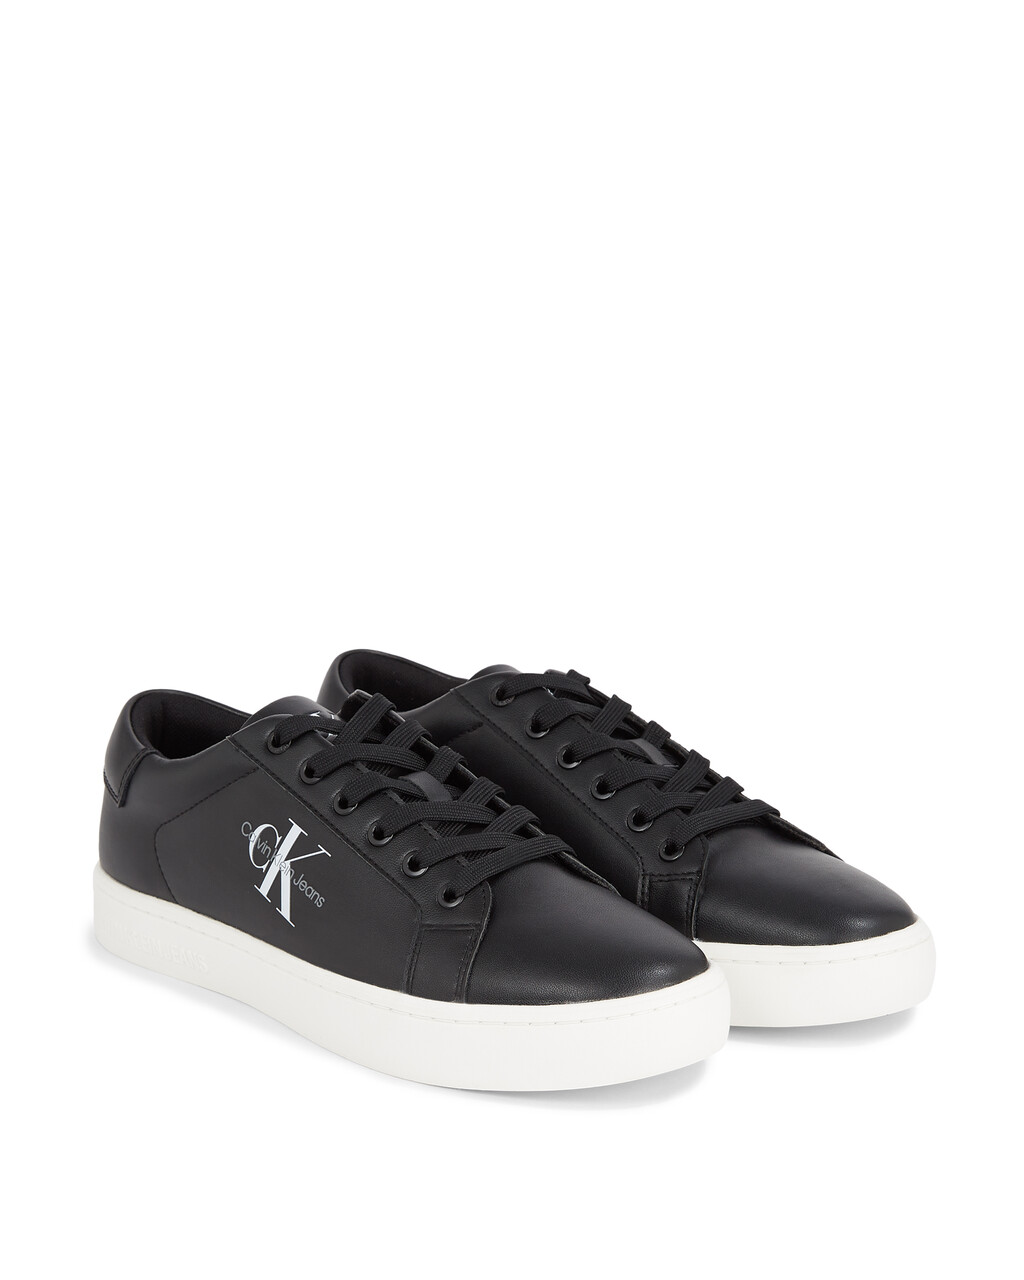 Leather Trainers, Black, hi-res